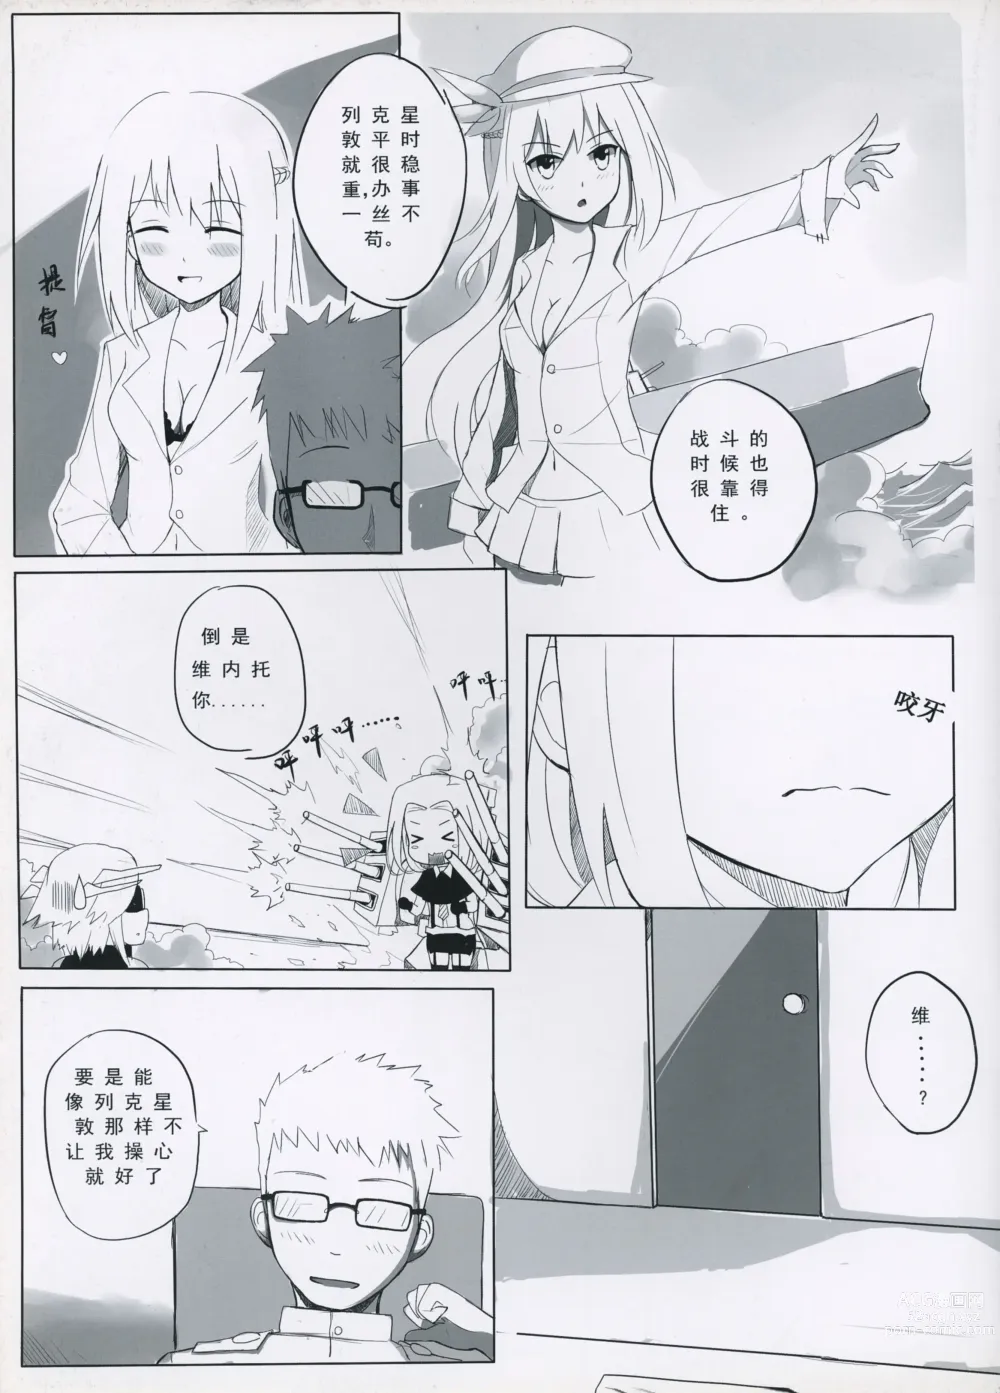 Page 5 of doujinshi The Daily Of Girls